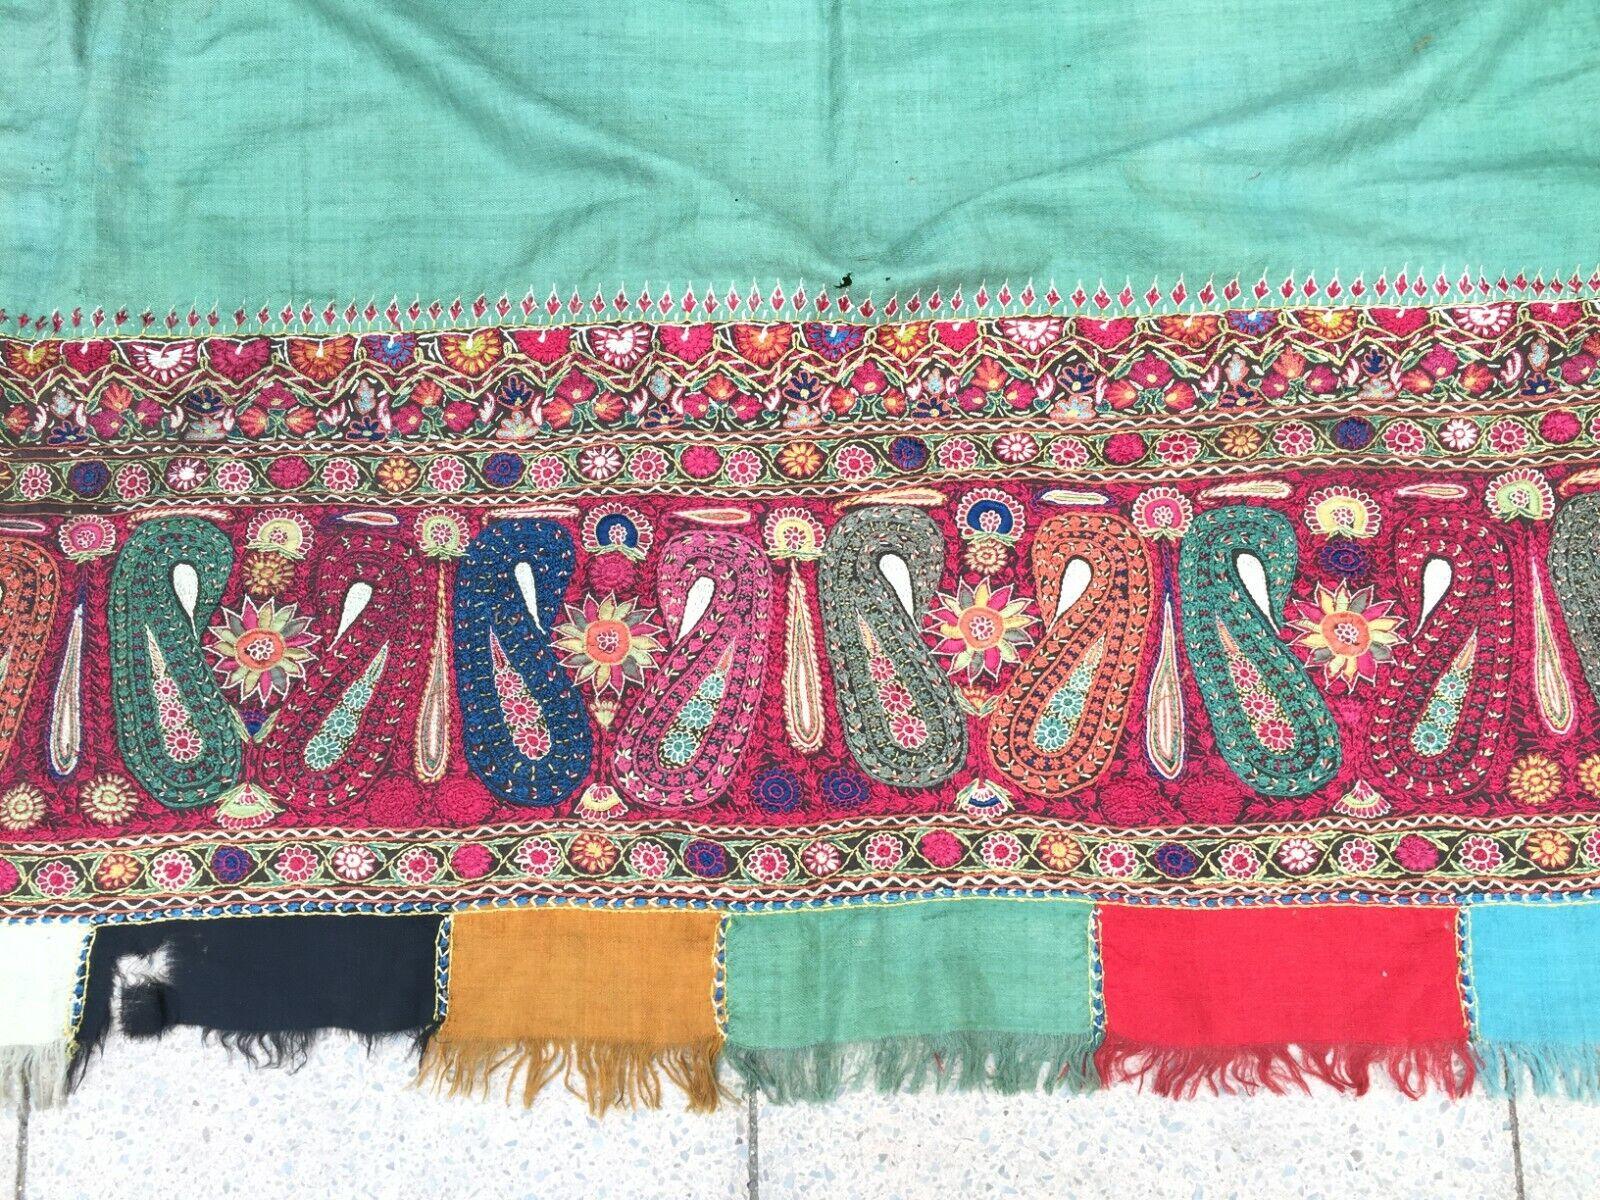 Hand-Knotted Handmade Antique Indian Kashmir Shawl 4.6' x 4.7', 1900s - 1W05 For Sale